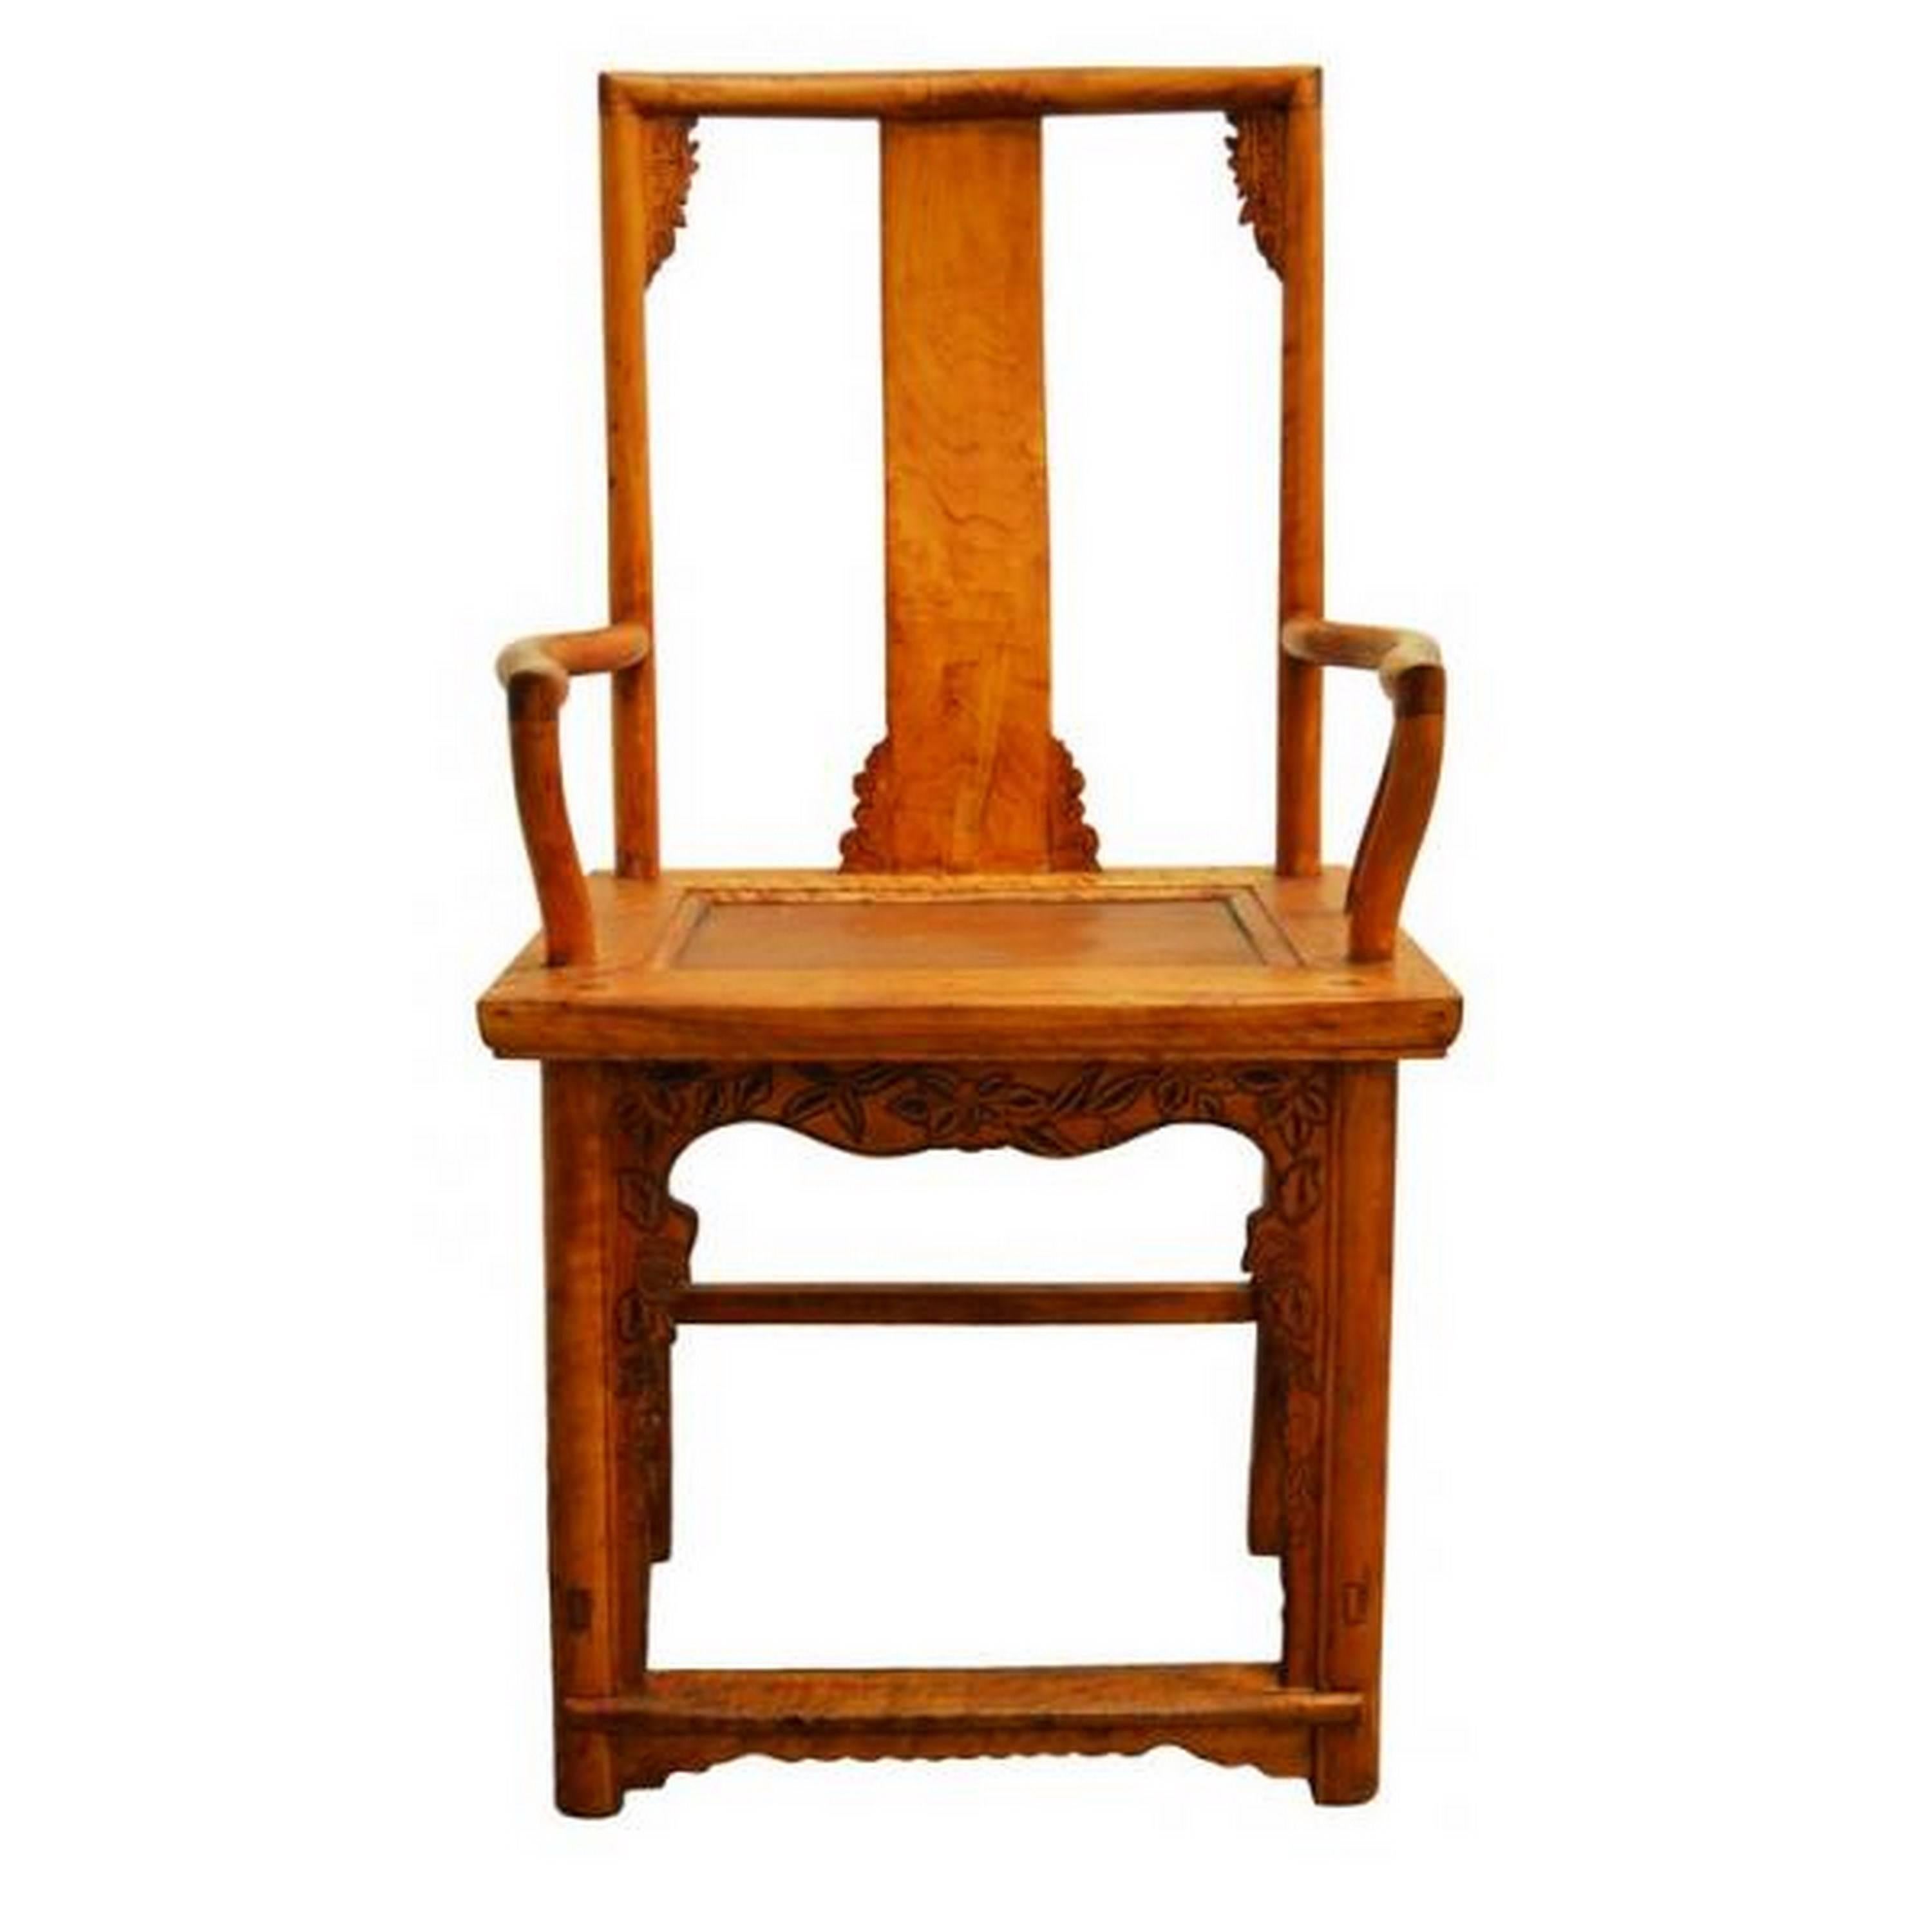 Antique Hand Carved and Lacquered Elmwood Chair from 19th Century China